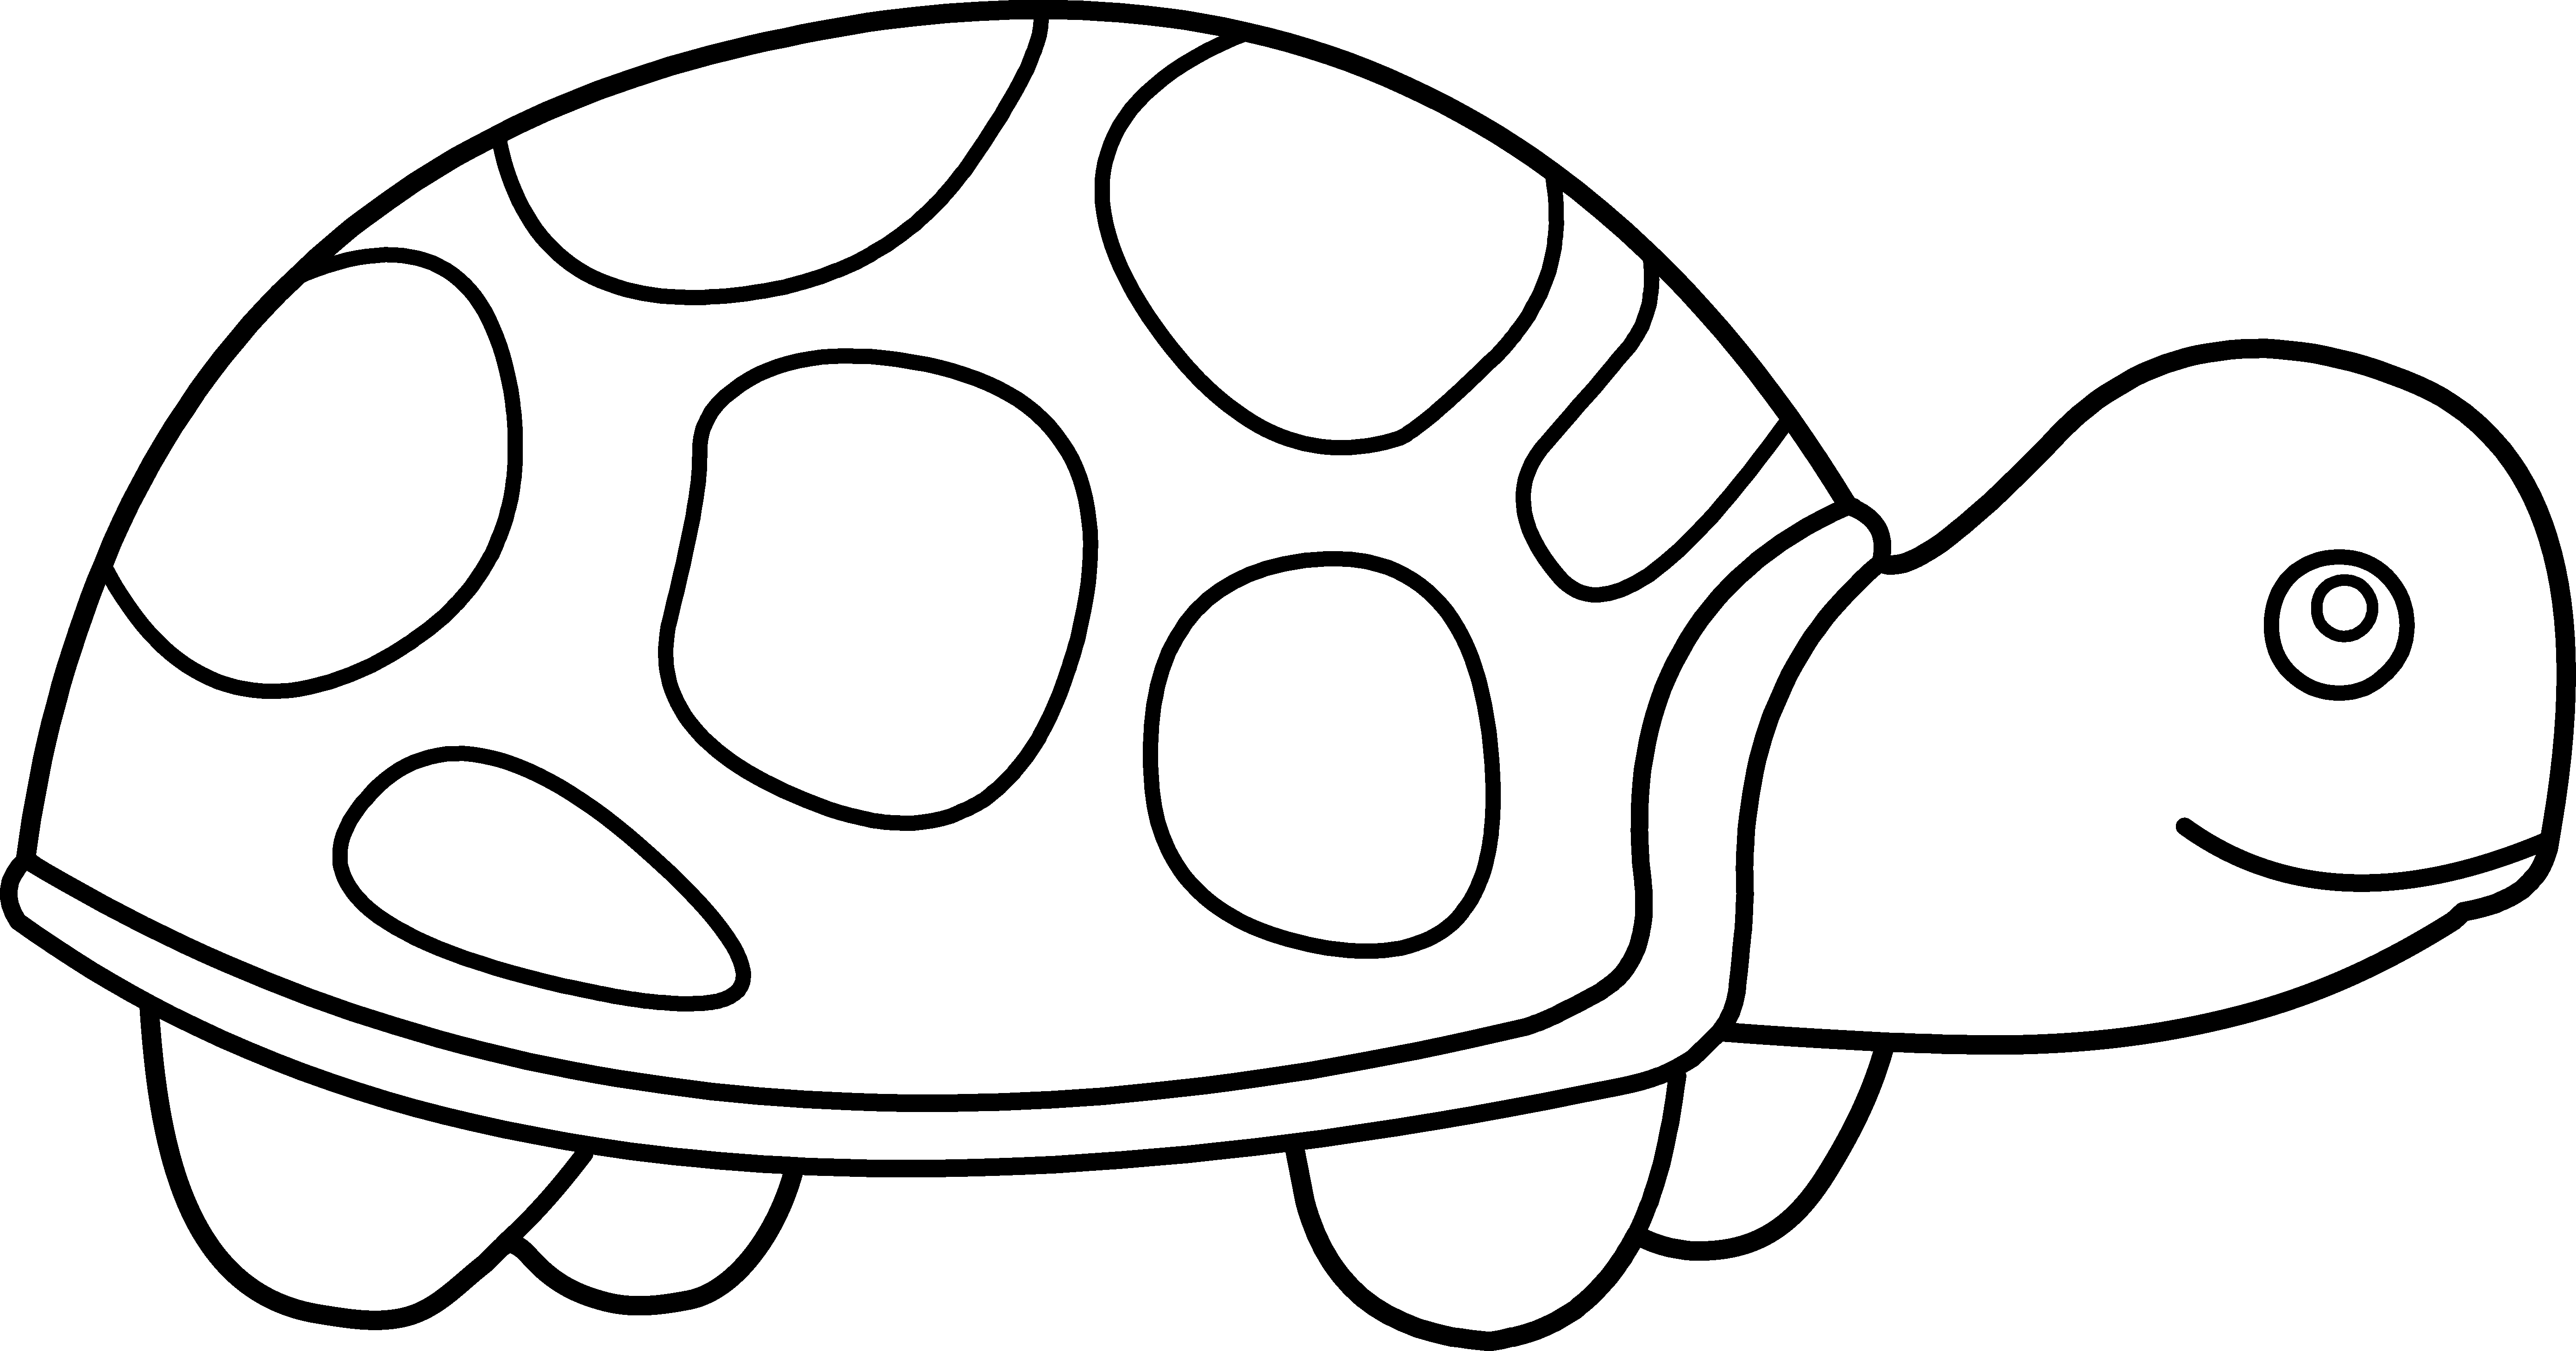 Turtle Clipart Black And White 